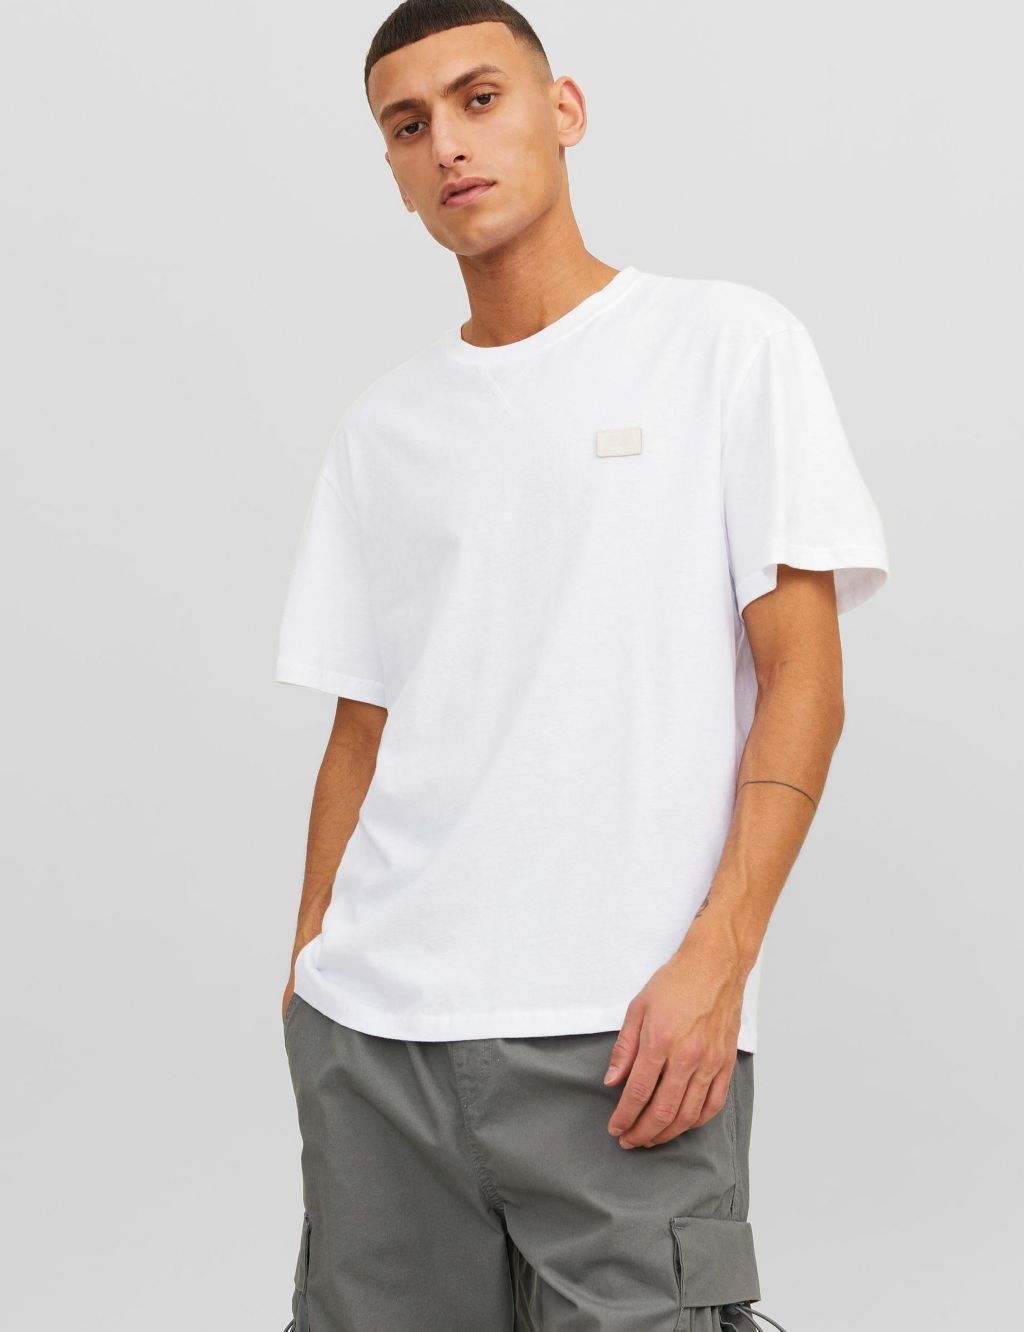 Relaxed Fit Pure Cotton T-Shirt image 1